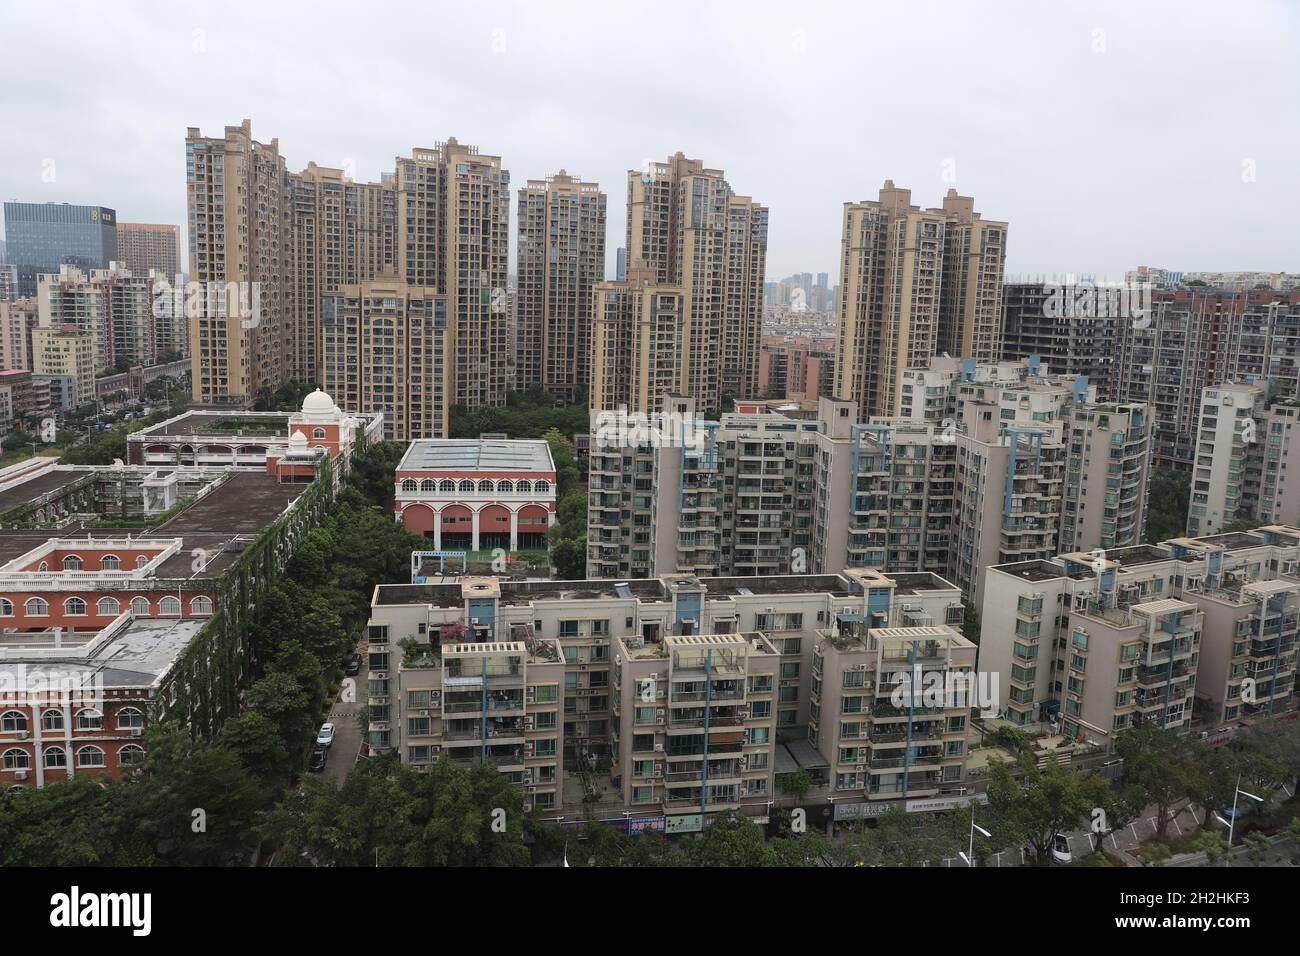 SHENZHEN, CHINA - OCTOBER 22, 2021 - High-rise residential buildings stand in an urban area in Shenzhen, Guangdong Province, China, On October 22, 2021. The current housing price in Shenzhen is 65,500 yuan per square meter. (Photo by Wang Jianfeng / Costfoto/Sipa USA) Stock Photo